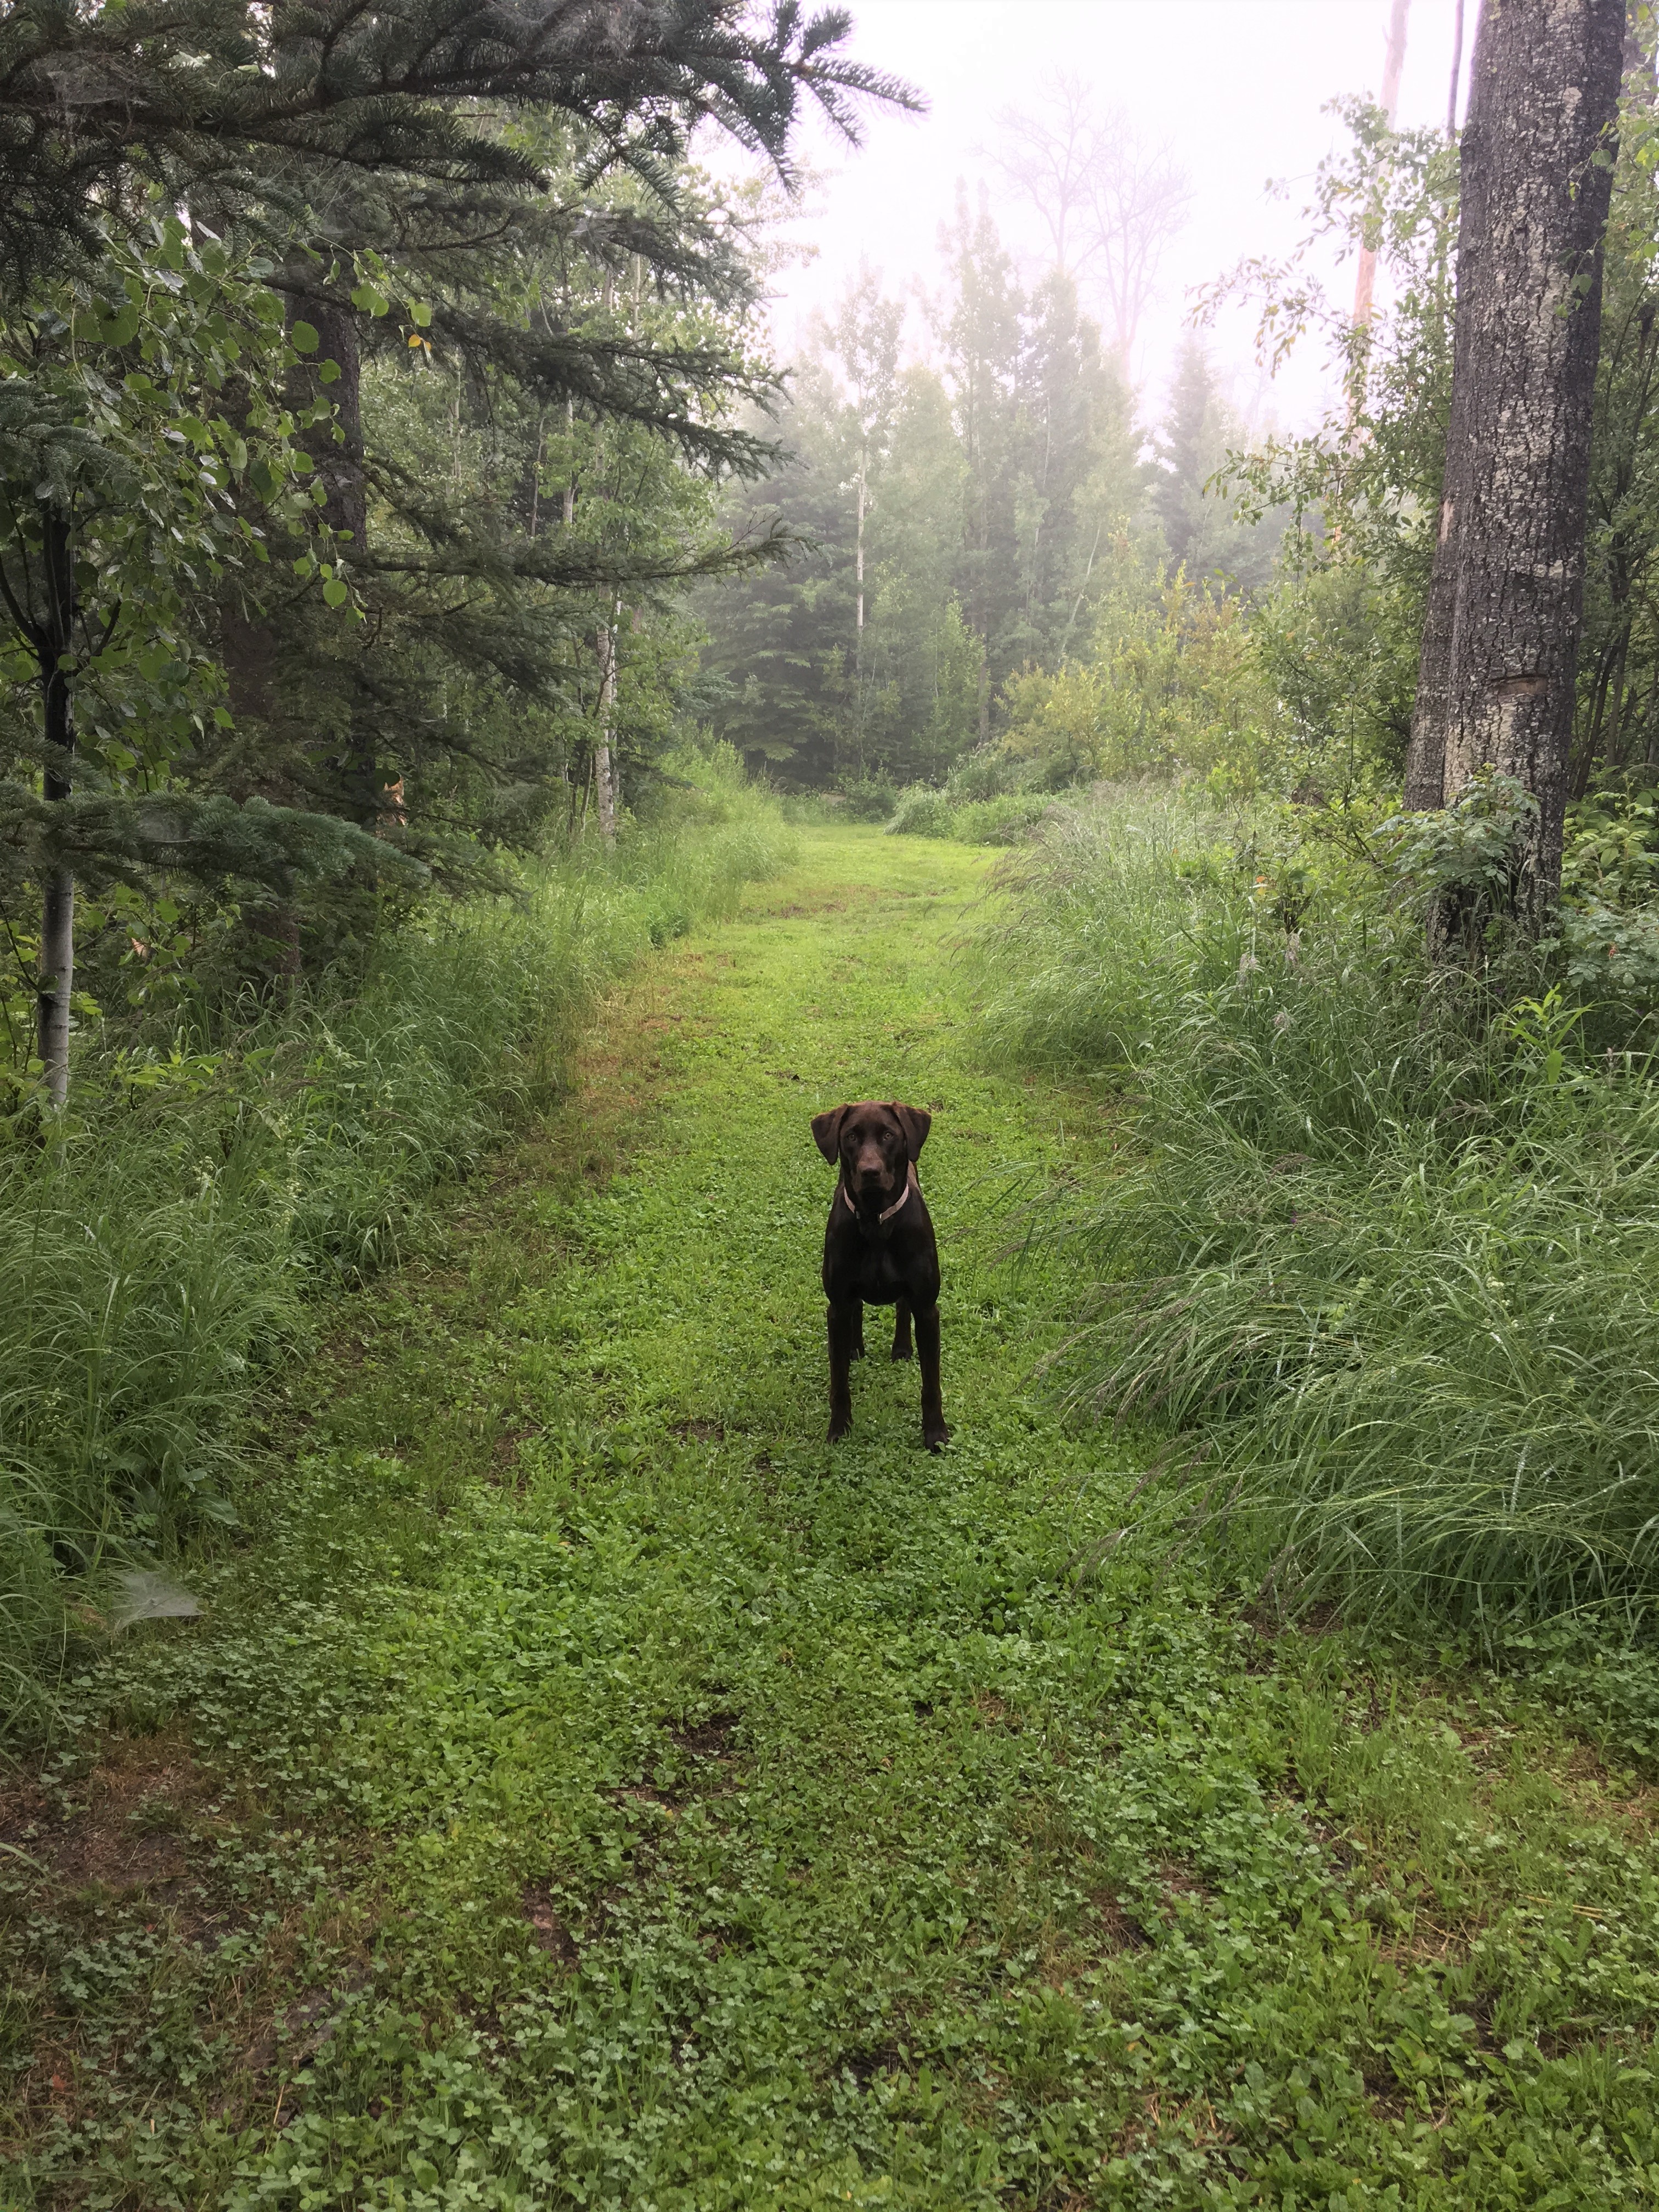 A chocolate lab puppy stands in the middle of a forest path waiting.